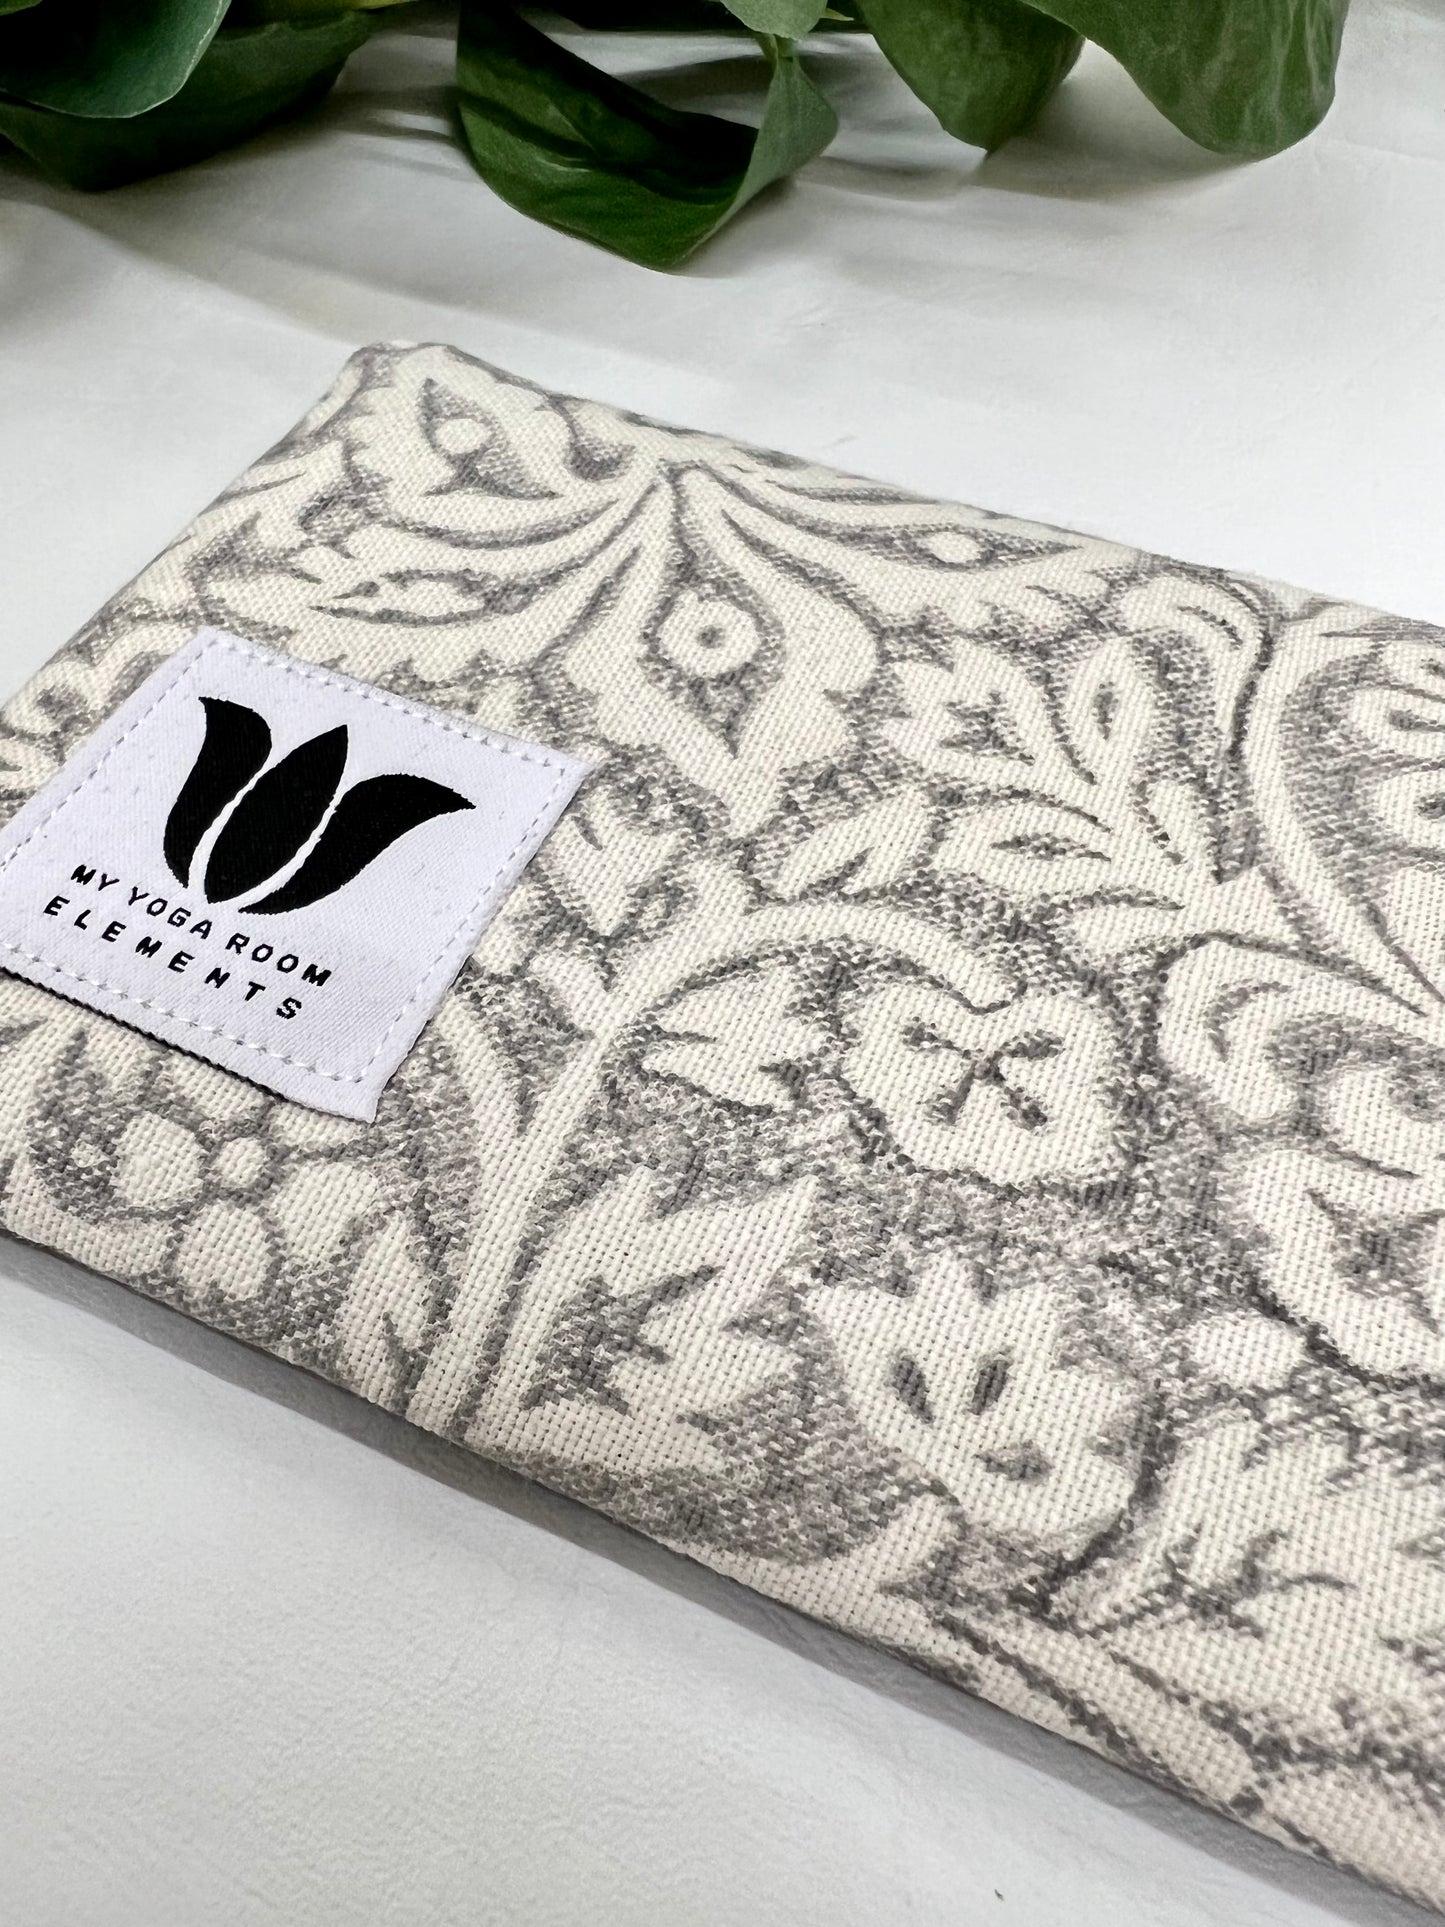 Unscented Eye Pillow in  Two Tone Grey and White Floral Print 100% cotton and organic bamboo fabric. Made in Canada by My Yoga Room Elements